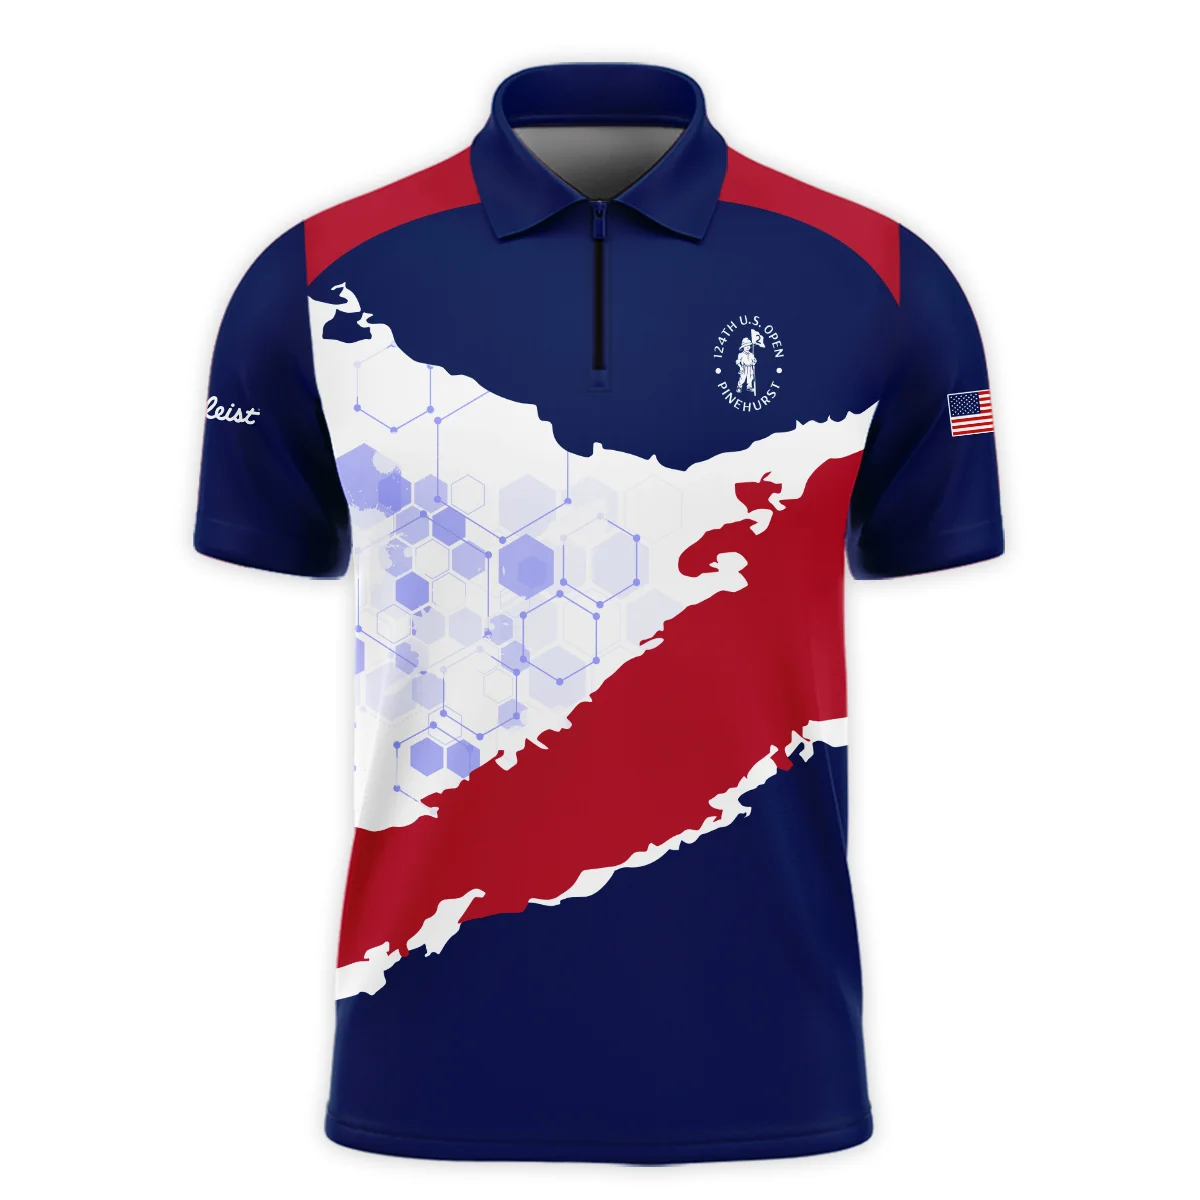 Titleist 124th U.S. Open Pinehurst Red Dark Blue White Abstract Background Polo Shirt Style Classic